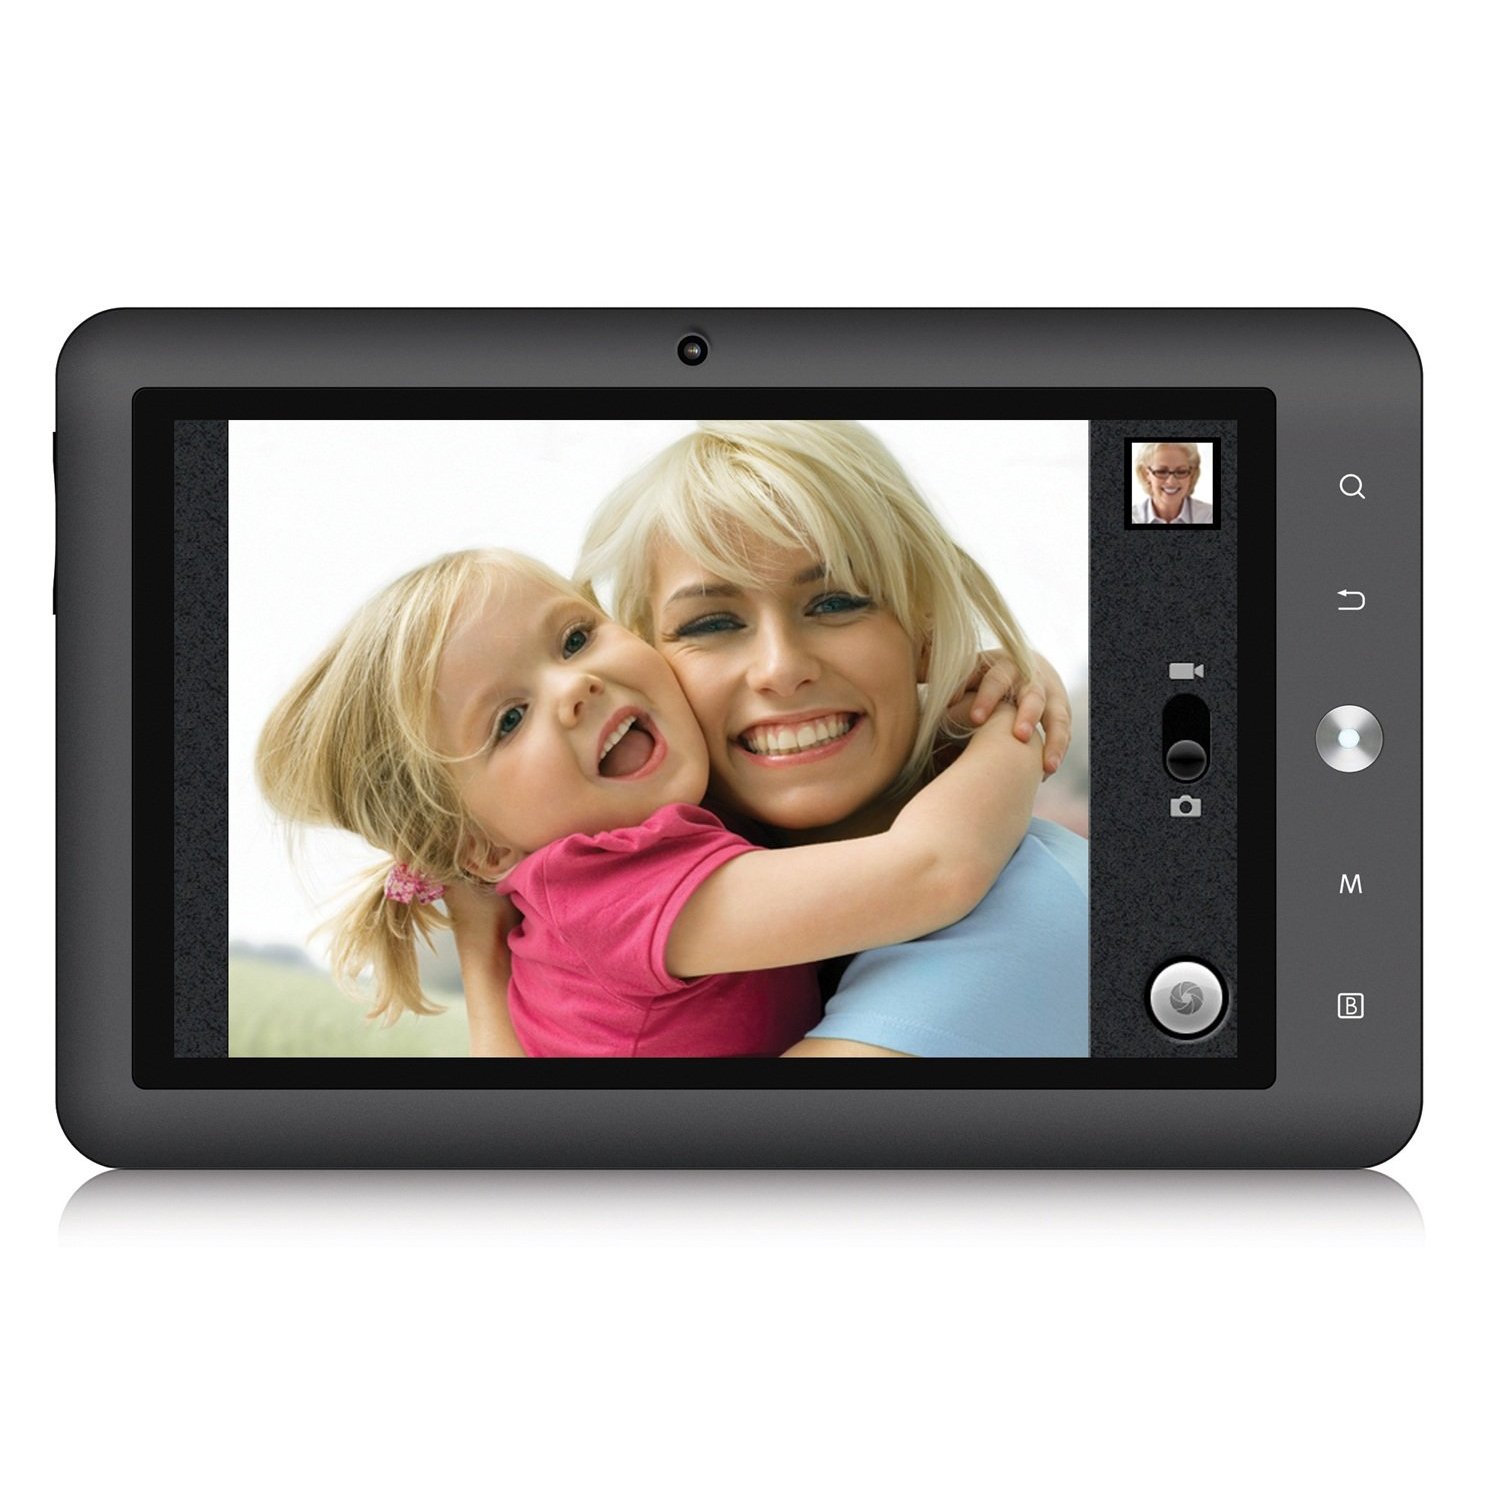 http://thetechjournal.com/wp-content/uploads/images/1108/1313981281-coby-kyros-4-gb-7inch-touchscreen-and-android-22-powered-tablet--4.jpg